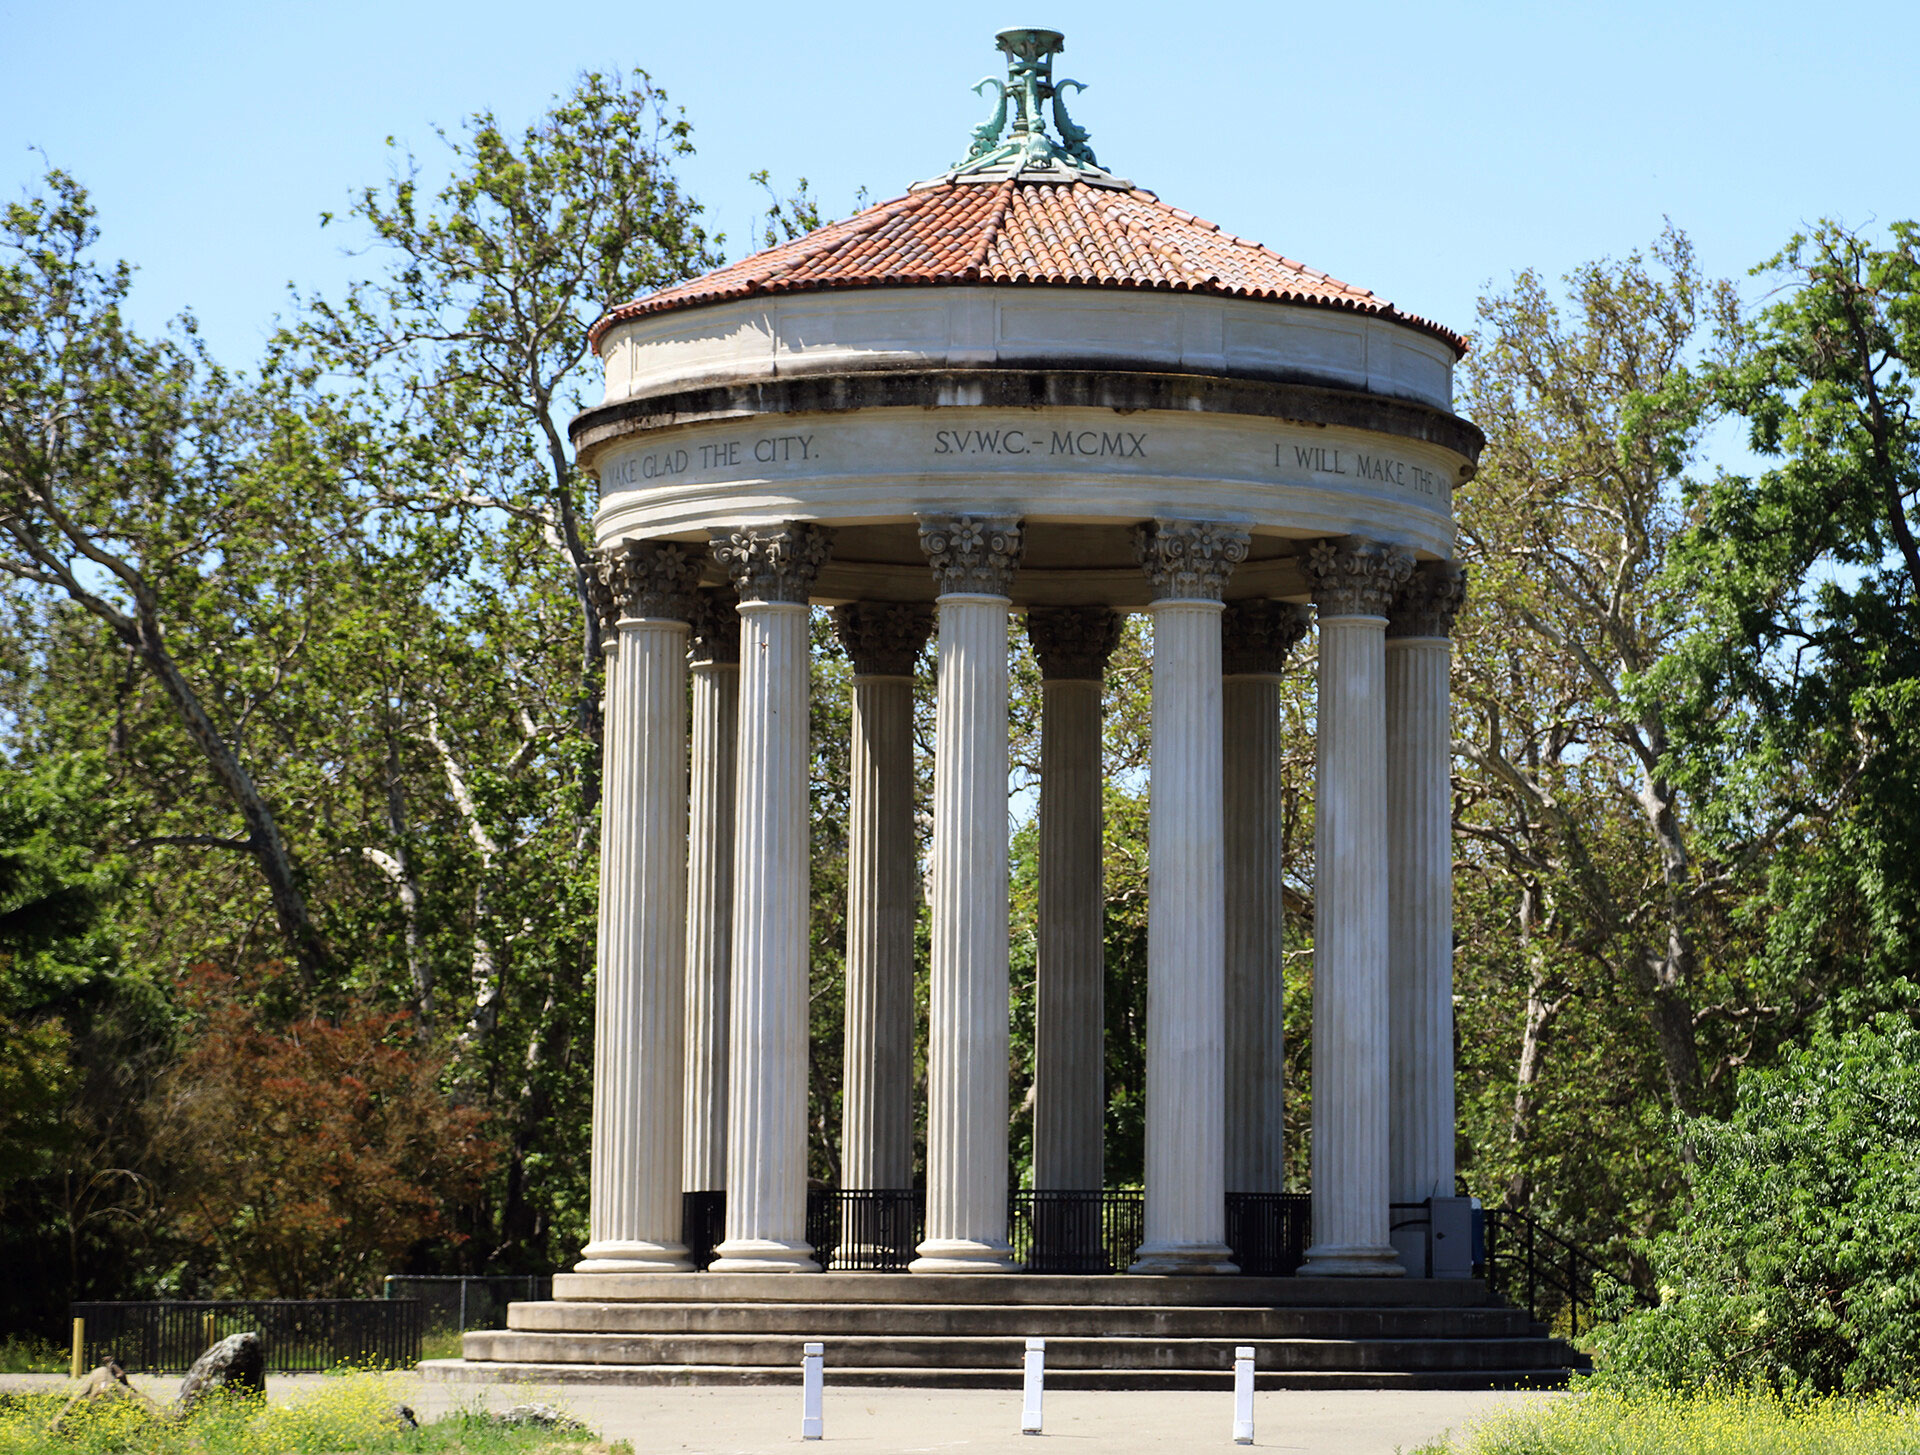 A round classical-looking structure with columns and a red roof take up the entire frame